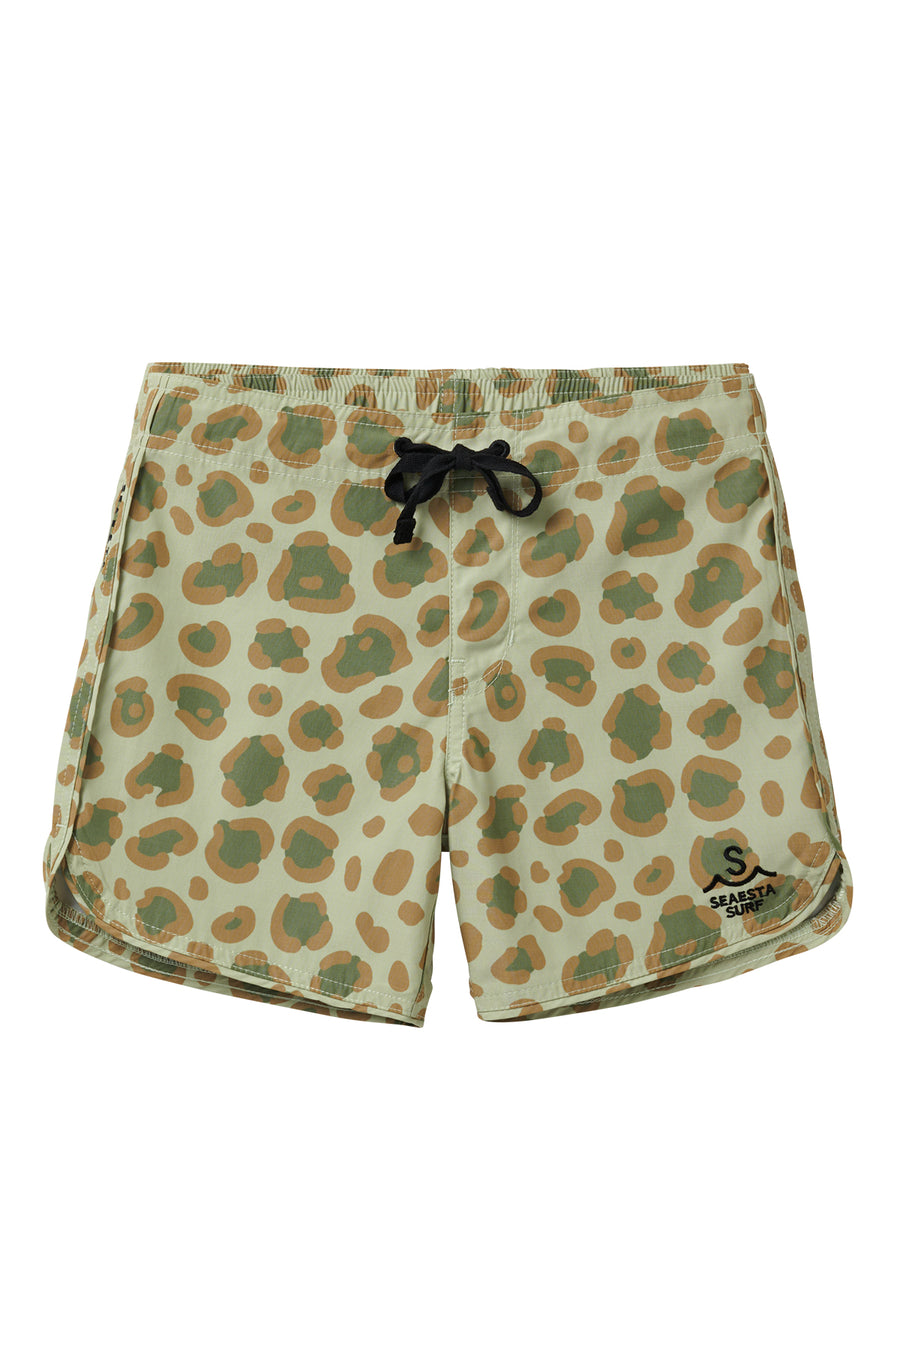 Calico Crab / Faded Army / Boardshorts